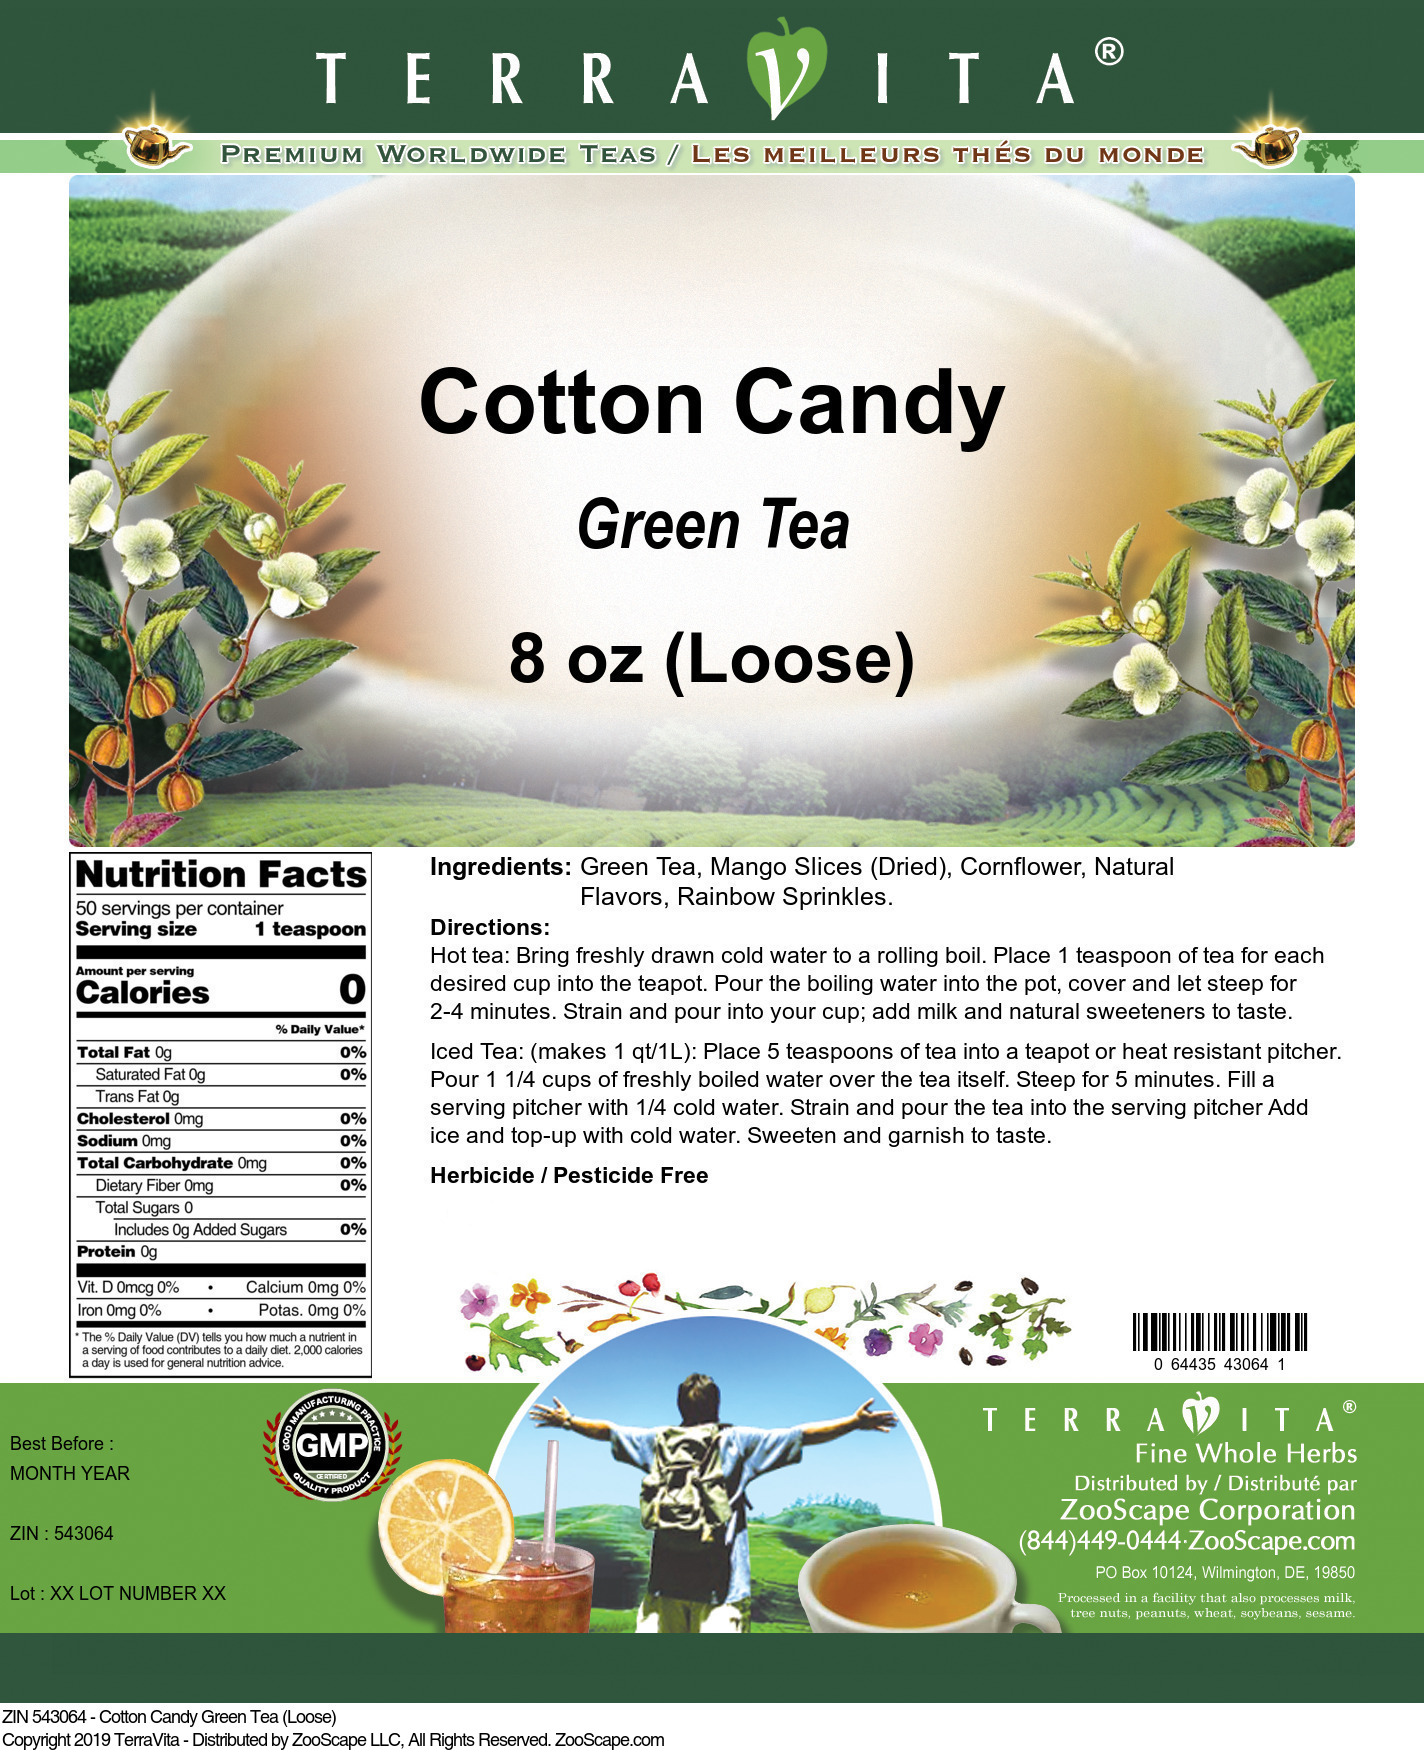 Cotton Candy Green Tea (Loose) - Label